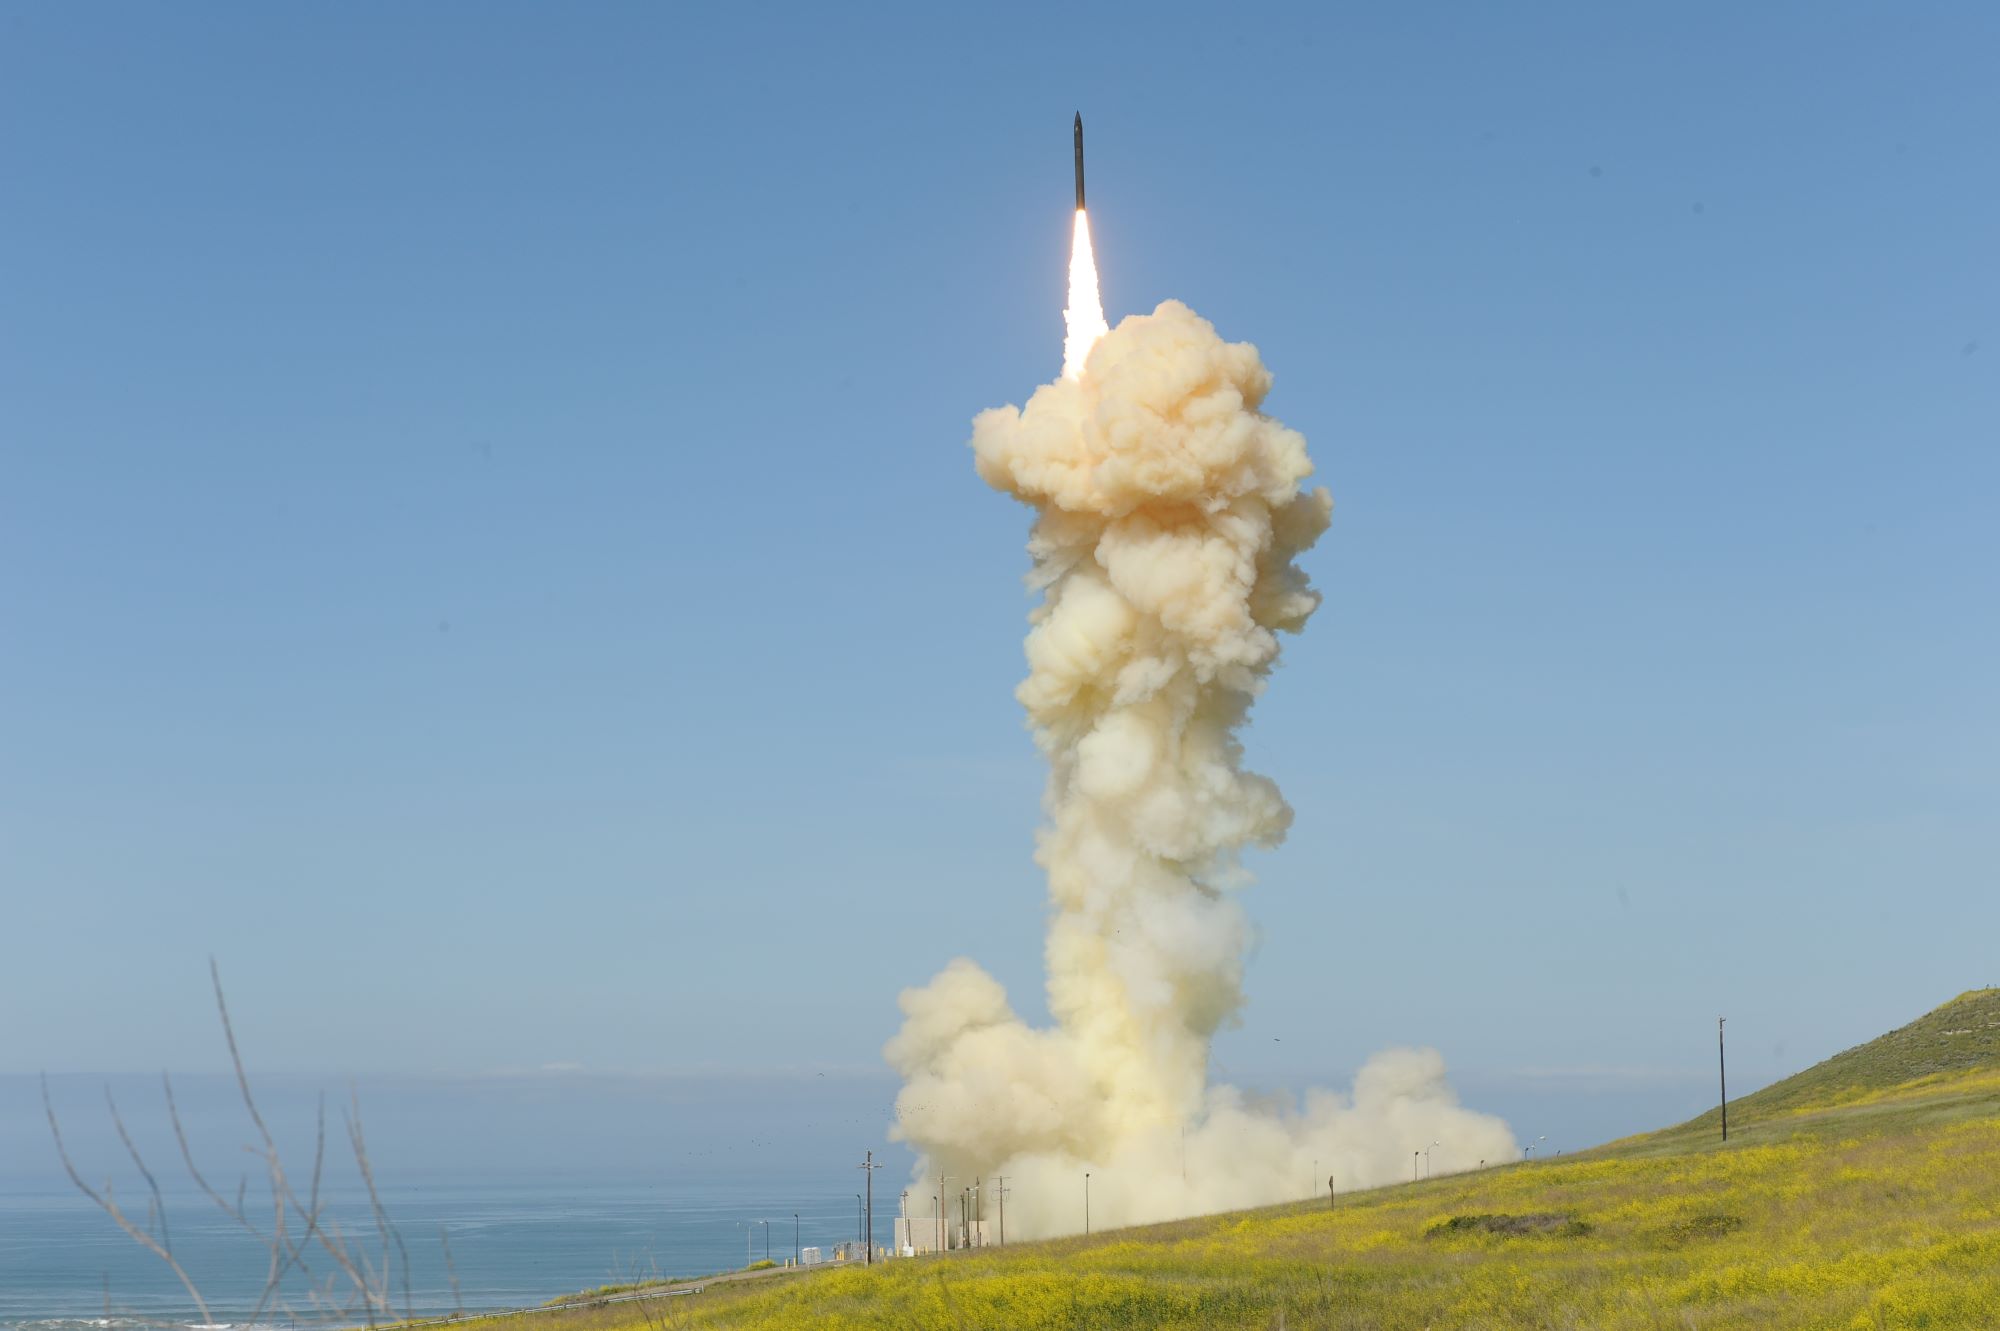 The ‘lead’ Ground-based Interceptor is launched from Vandenberg Air Force Base, California, March 25, 2019, in the first-ever salvo engagement test of a threat-representative ICBM target. Photo by Missile Defense Agency.